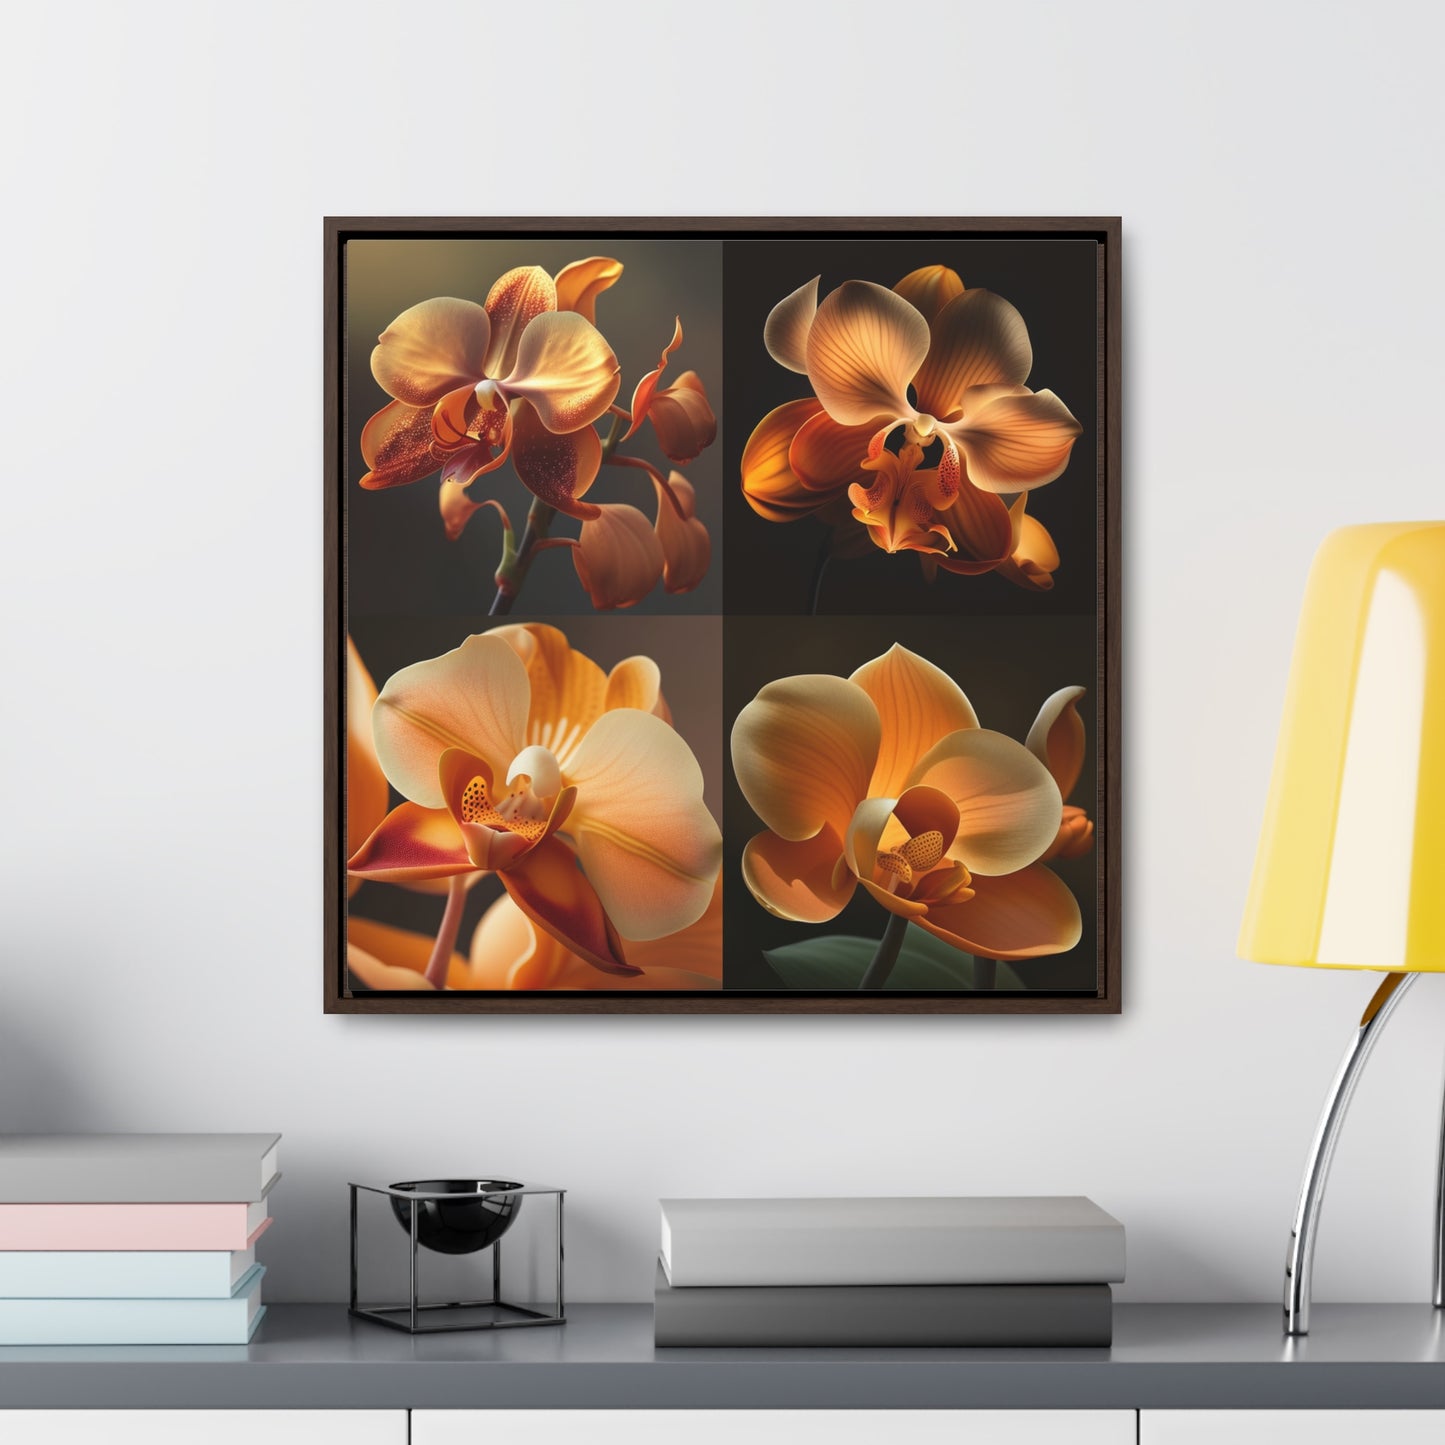 Gallery Canvas Wraps, Square Frame Orange Orchid 5